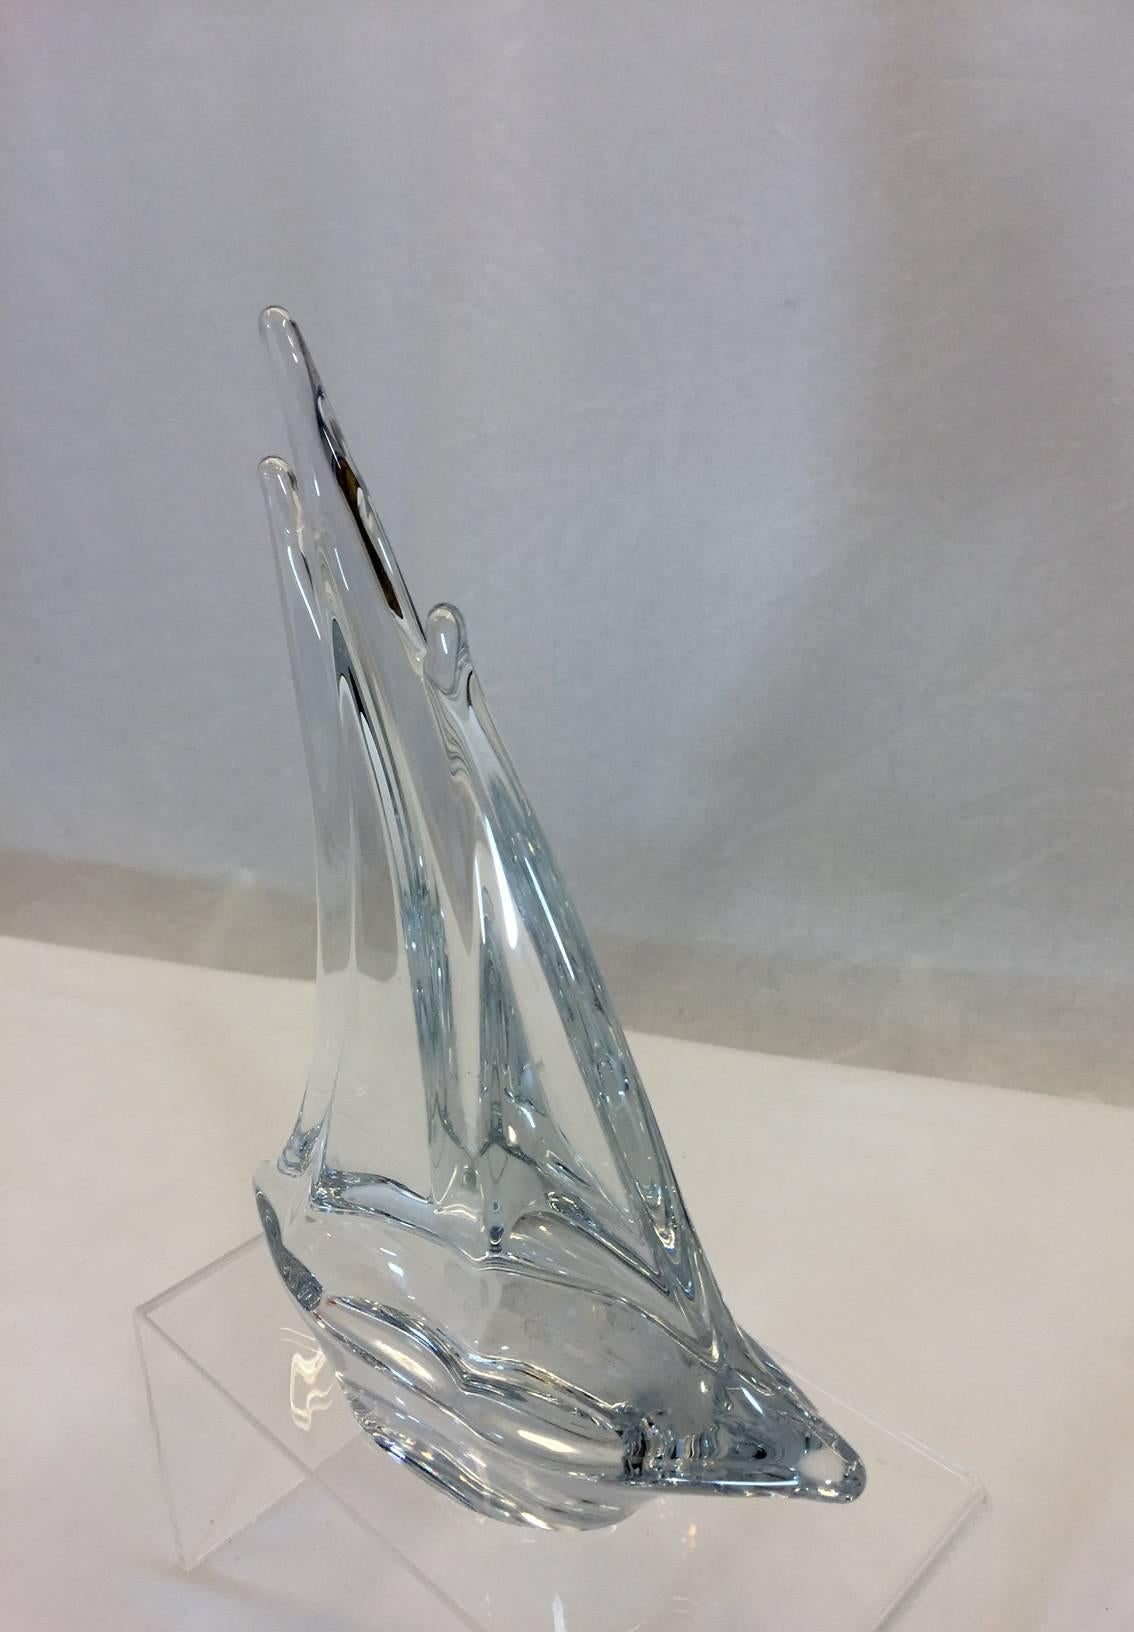 In perfect condition, this crystal sculpture is signed Daum, France as shown in photo. It is very heavy with no signs of wear.